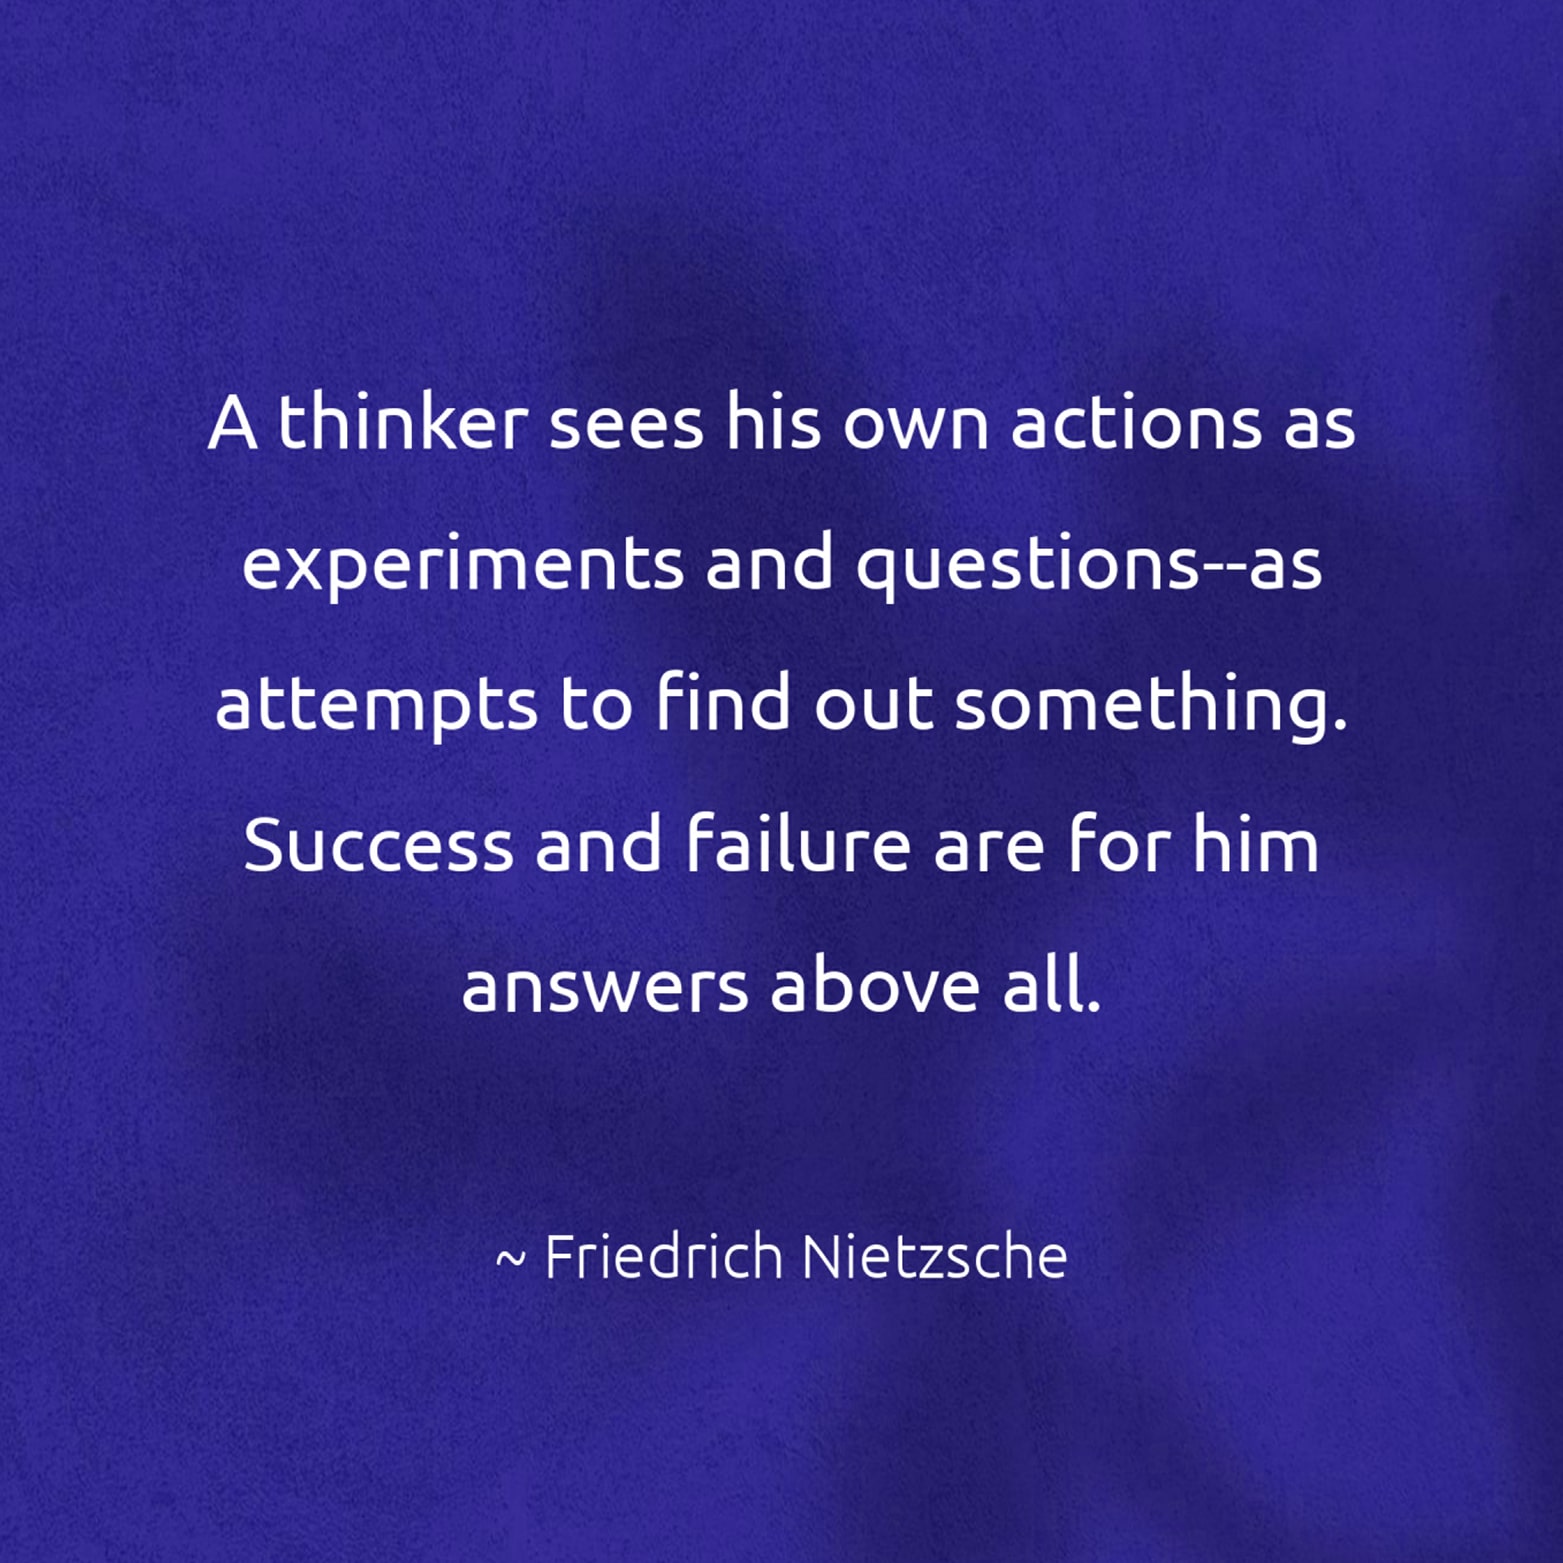 A thinker sees his own actions as experiments and questions--as attempts to find out something. Success and failure are for him answers above all. - Friedrich Nietzsche